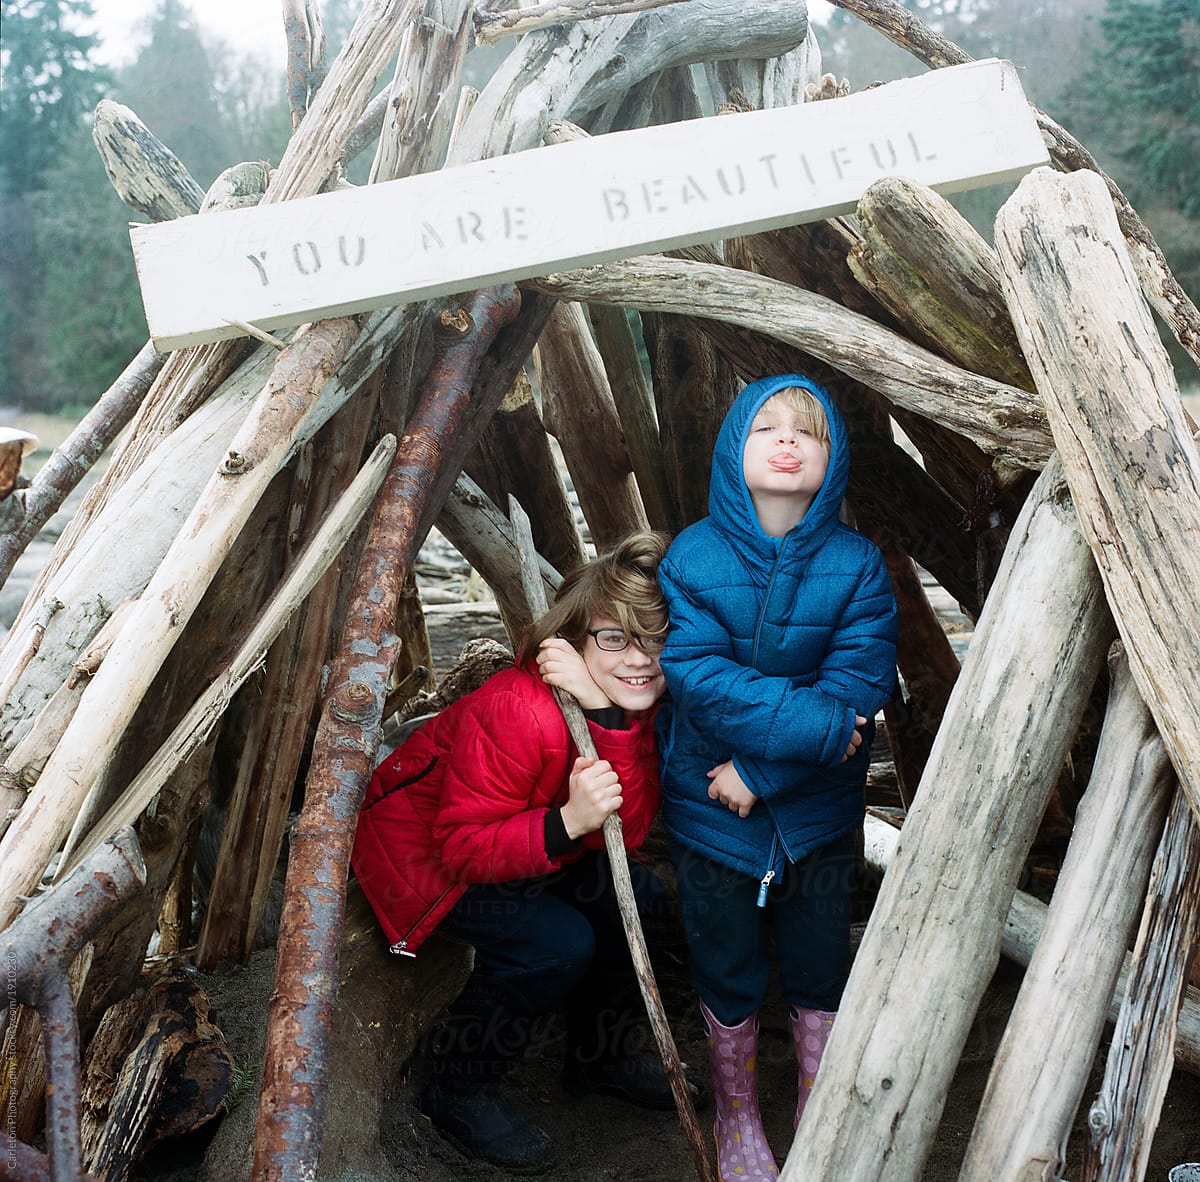 Brothers sharing some time in a driftwood fort